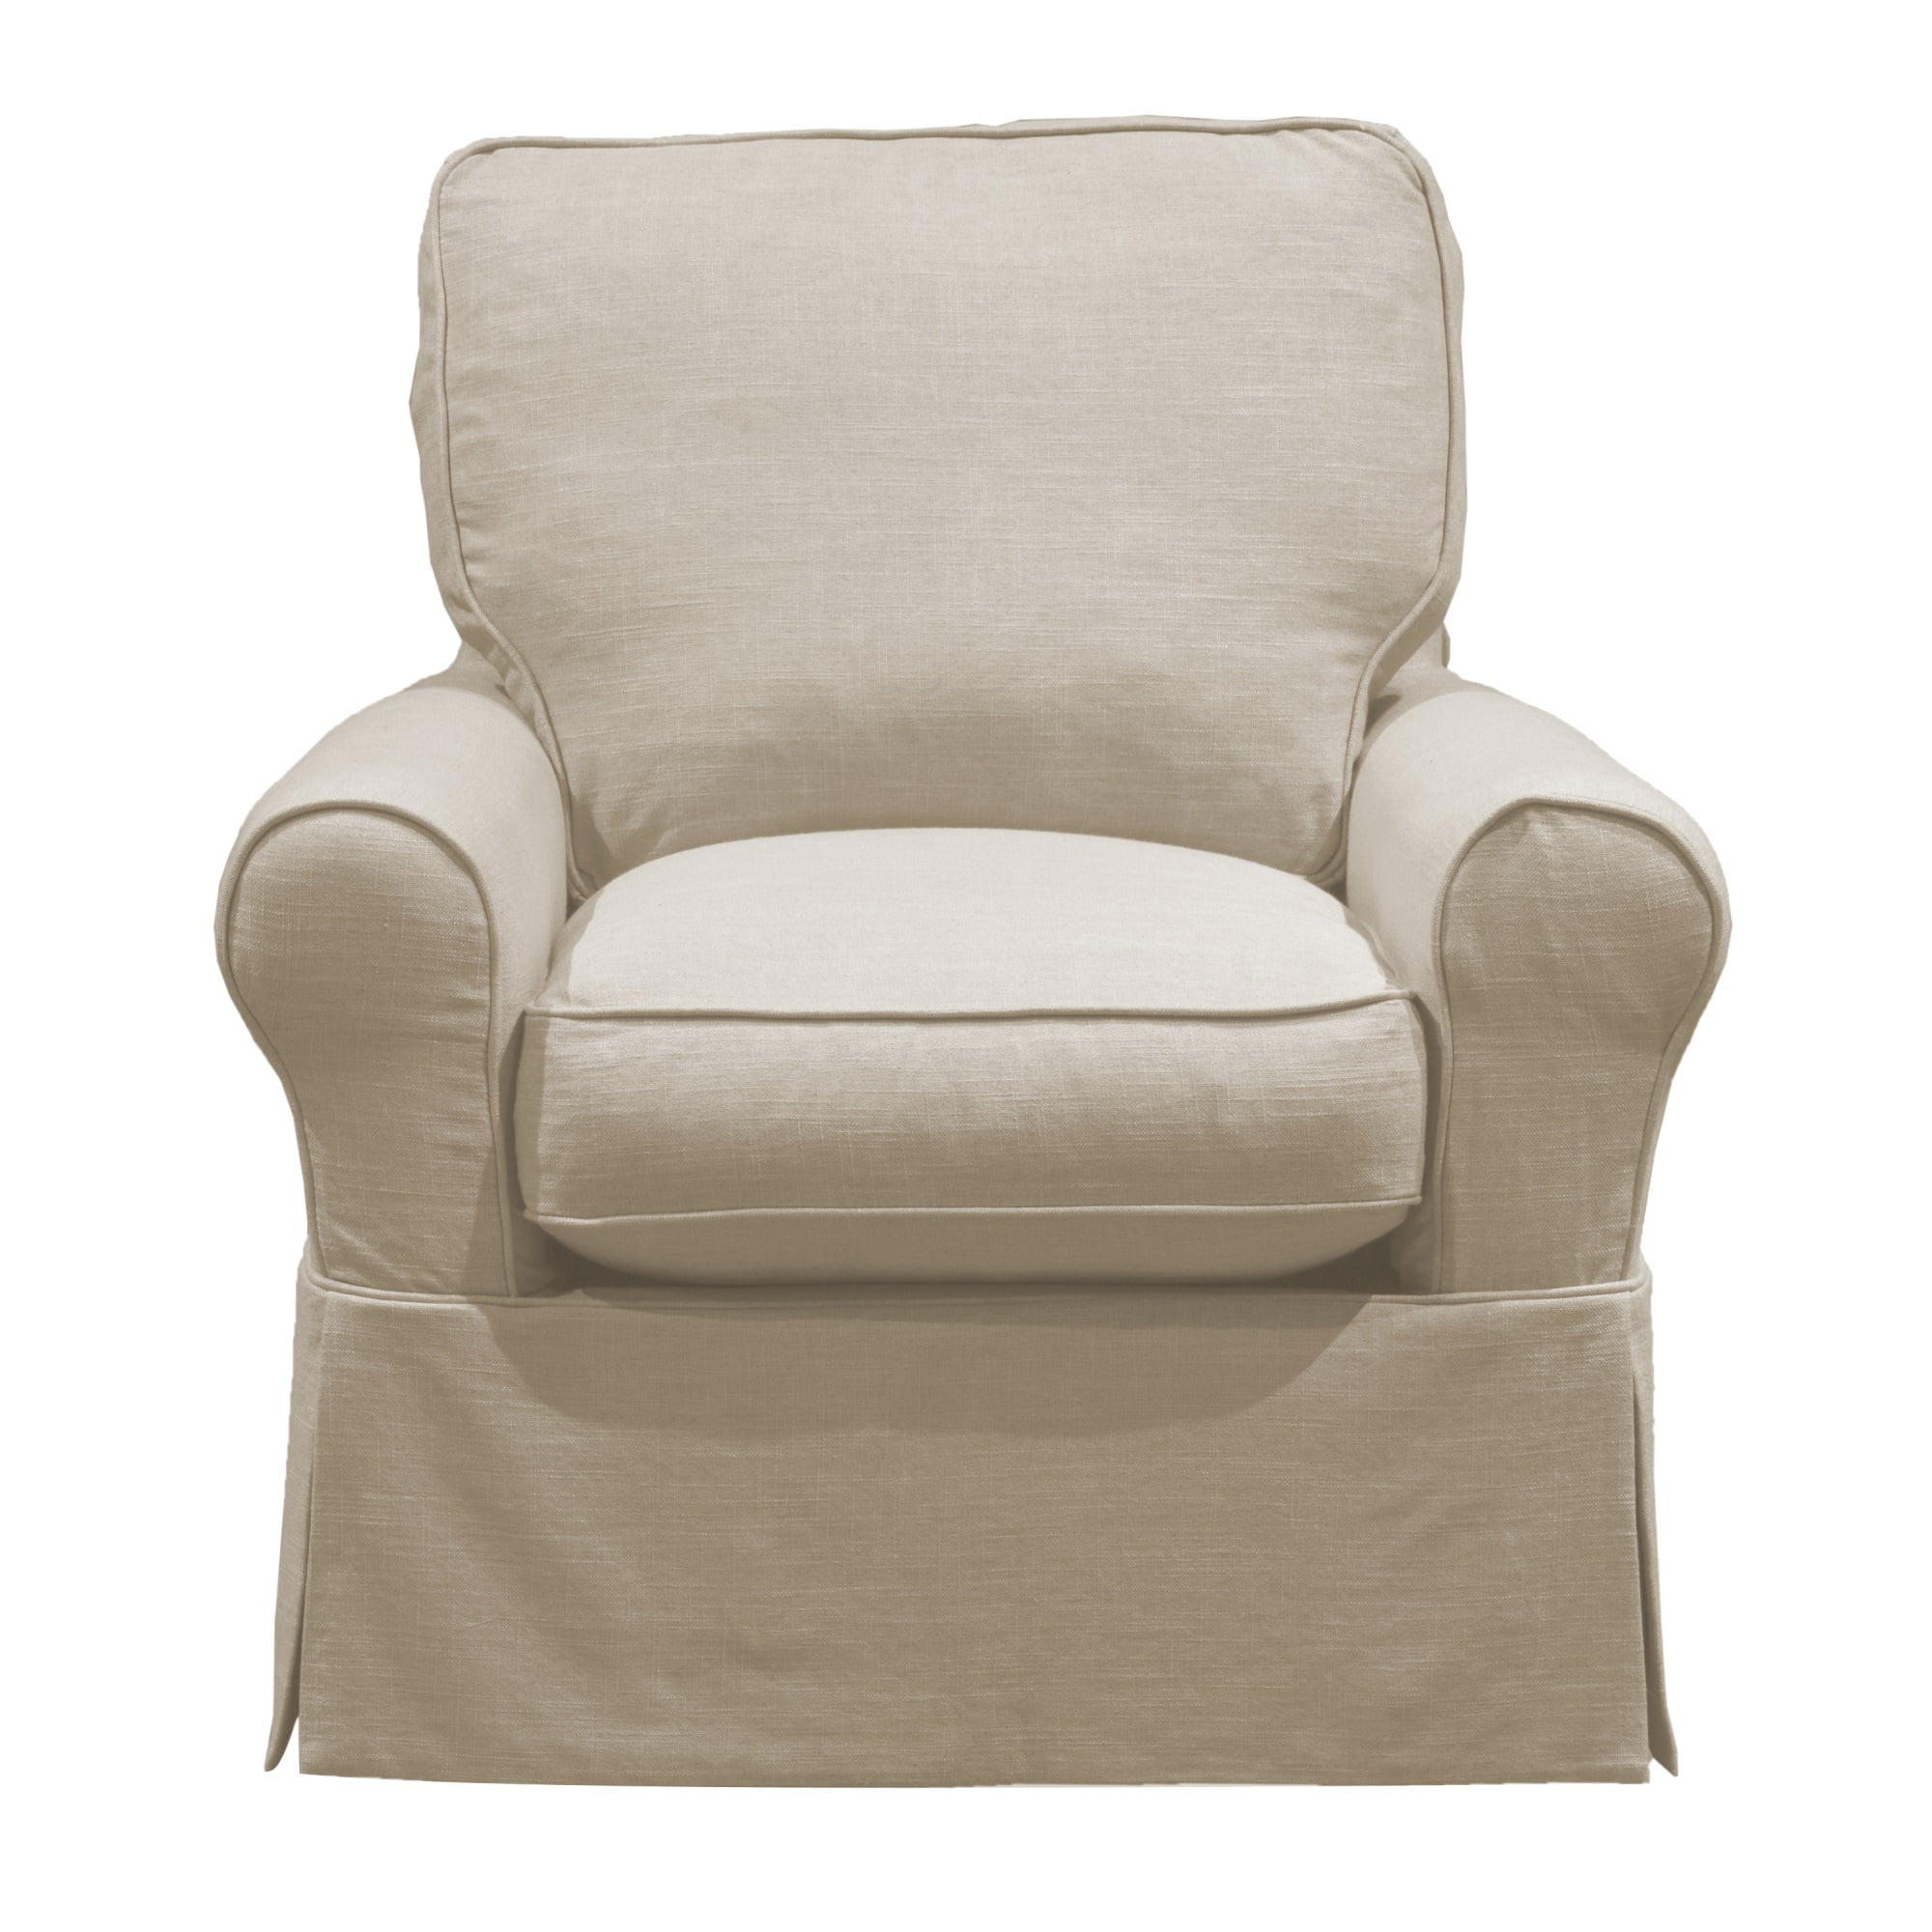 Details about   Full Body Slipcover Massage Chair Cover Recliner Mildew Proof Anti Dust Folding 